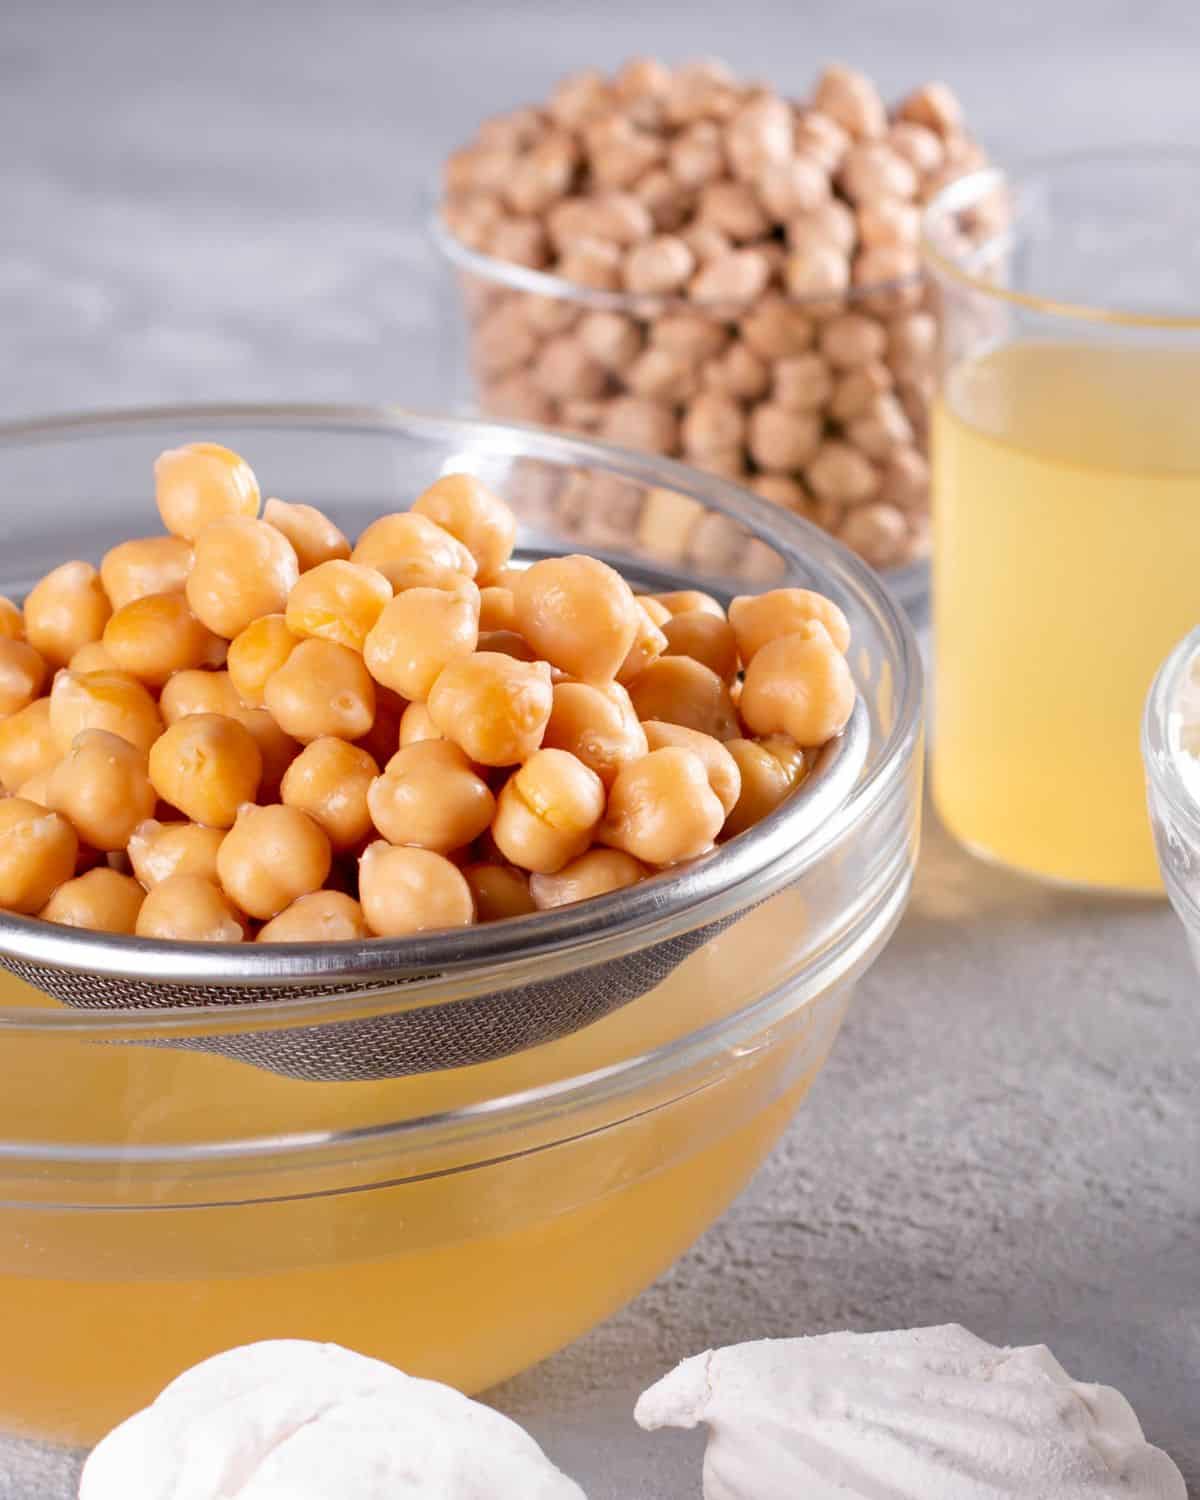 Image of chickpeas and chickpea liquid. The image is for a recipe post on how to use chickpea liquid or aquafaba in place of eggs.